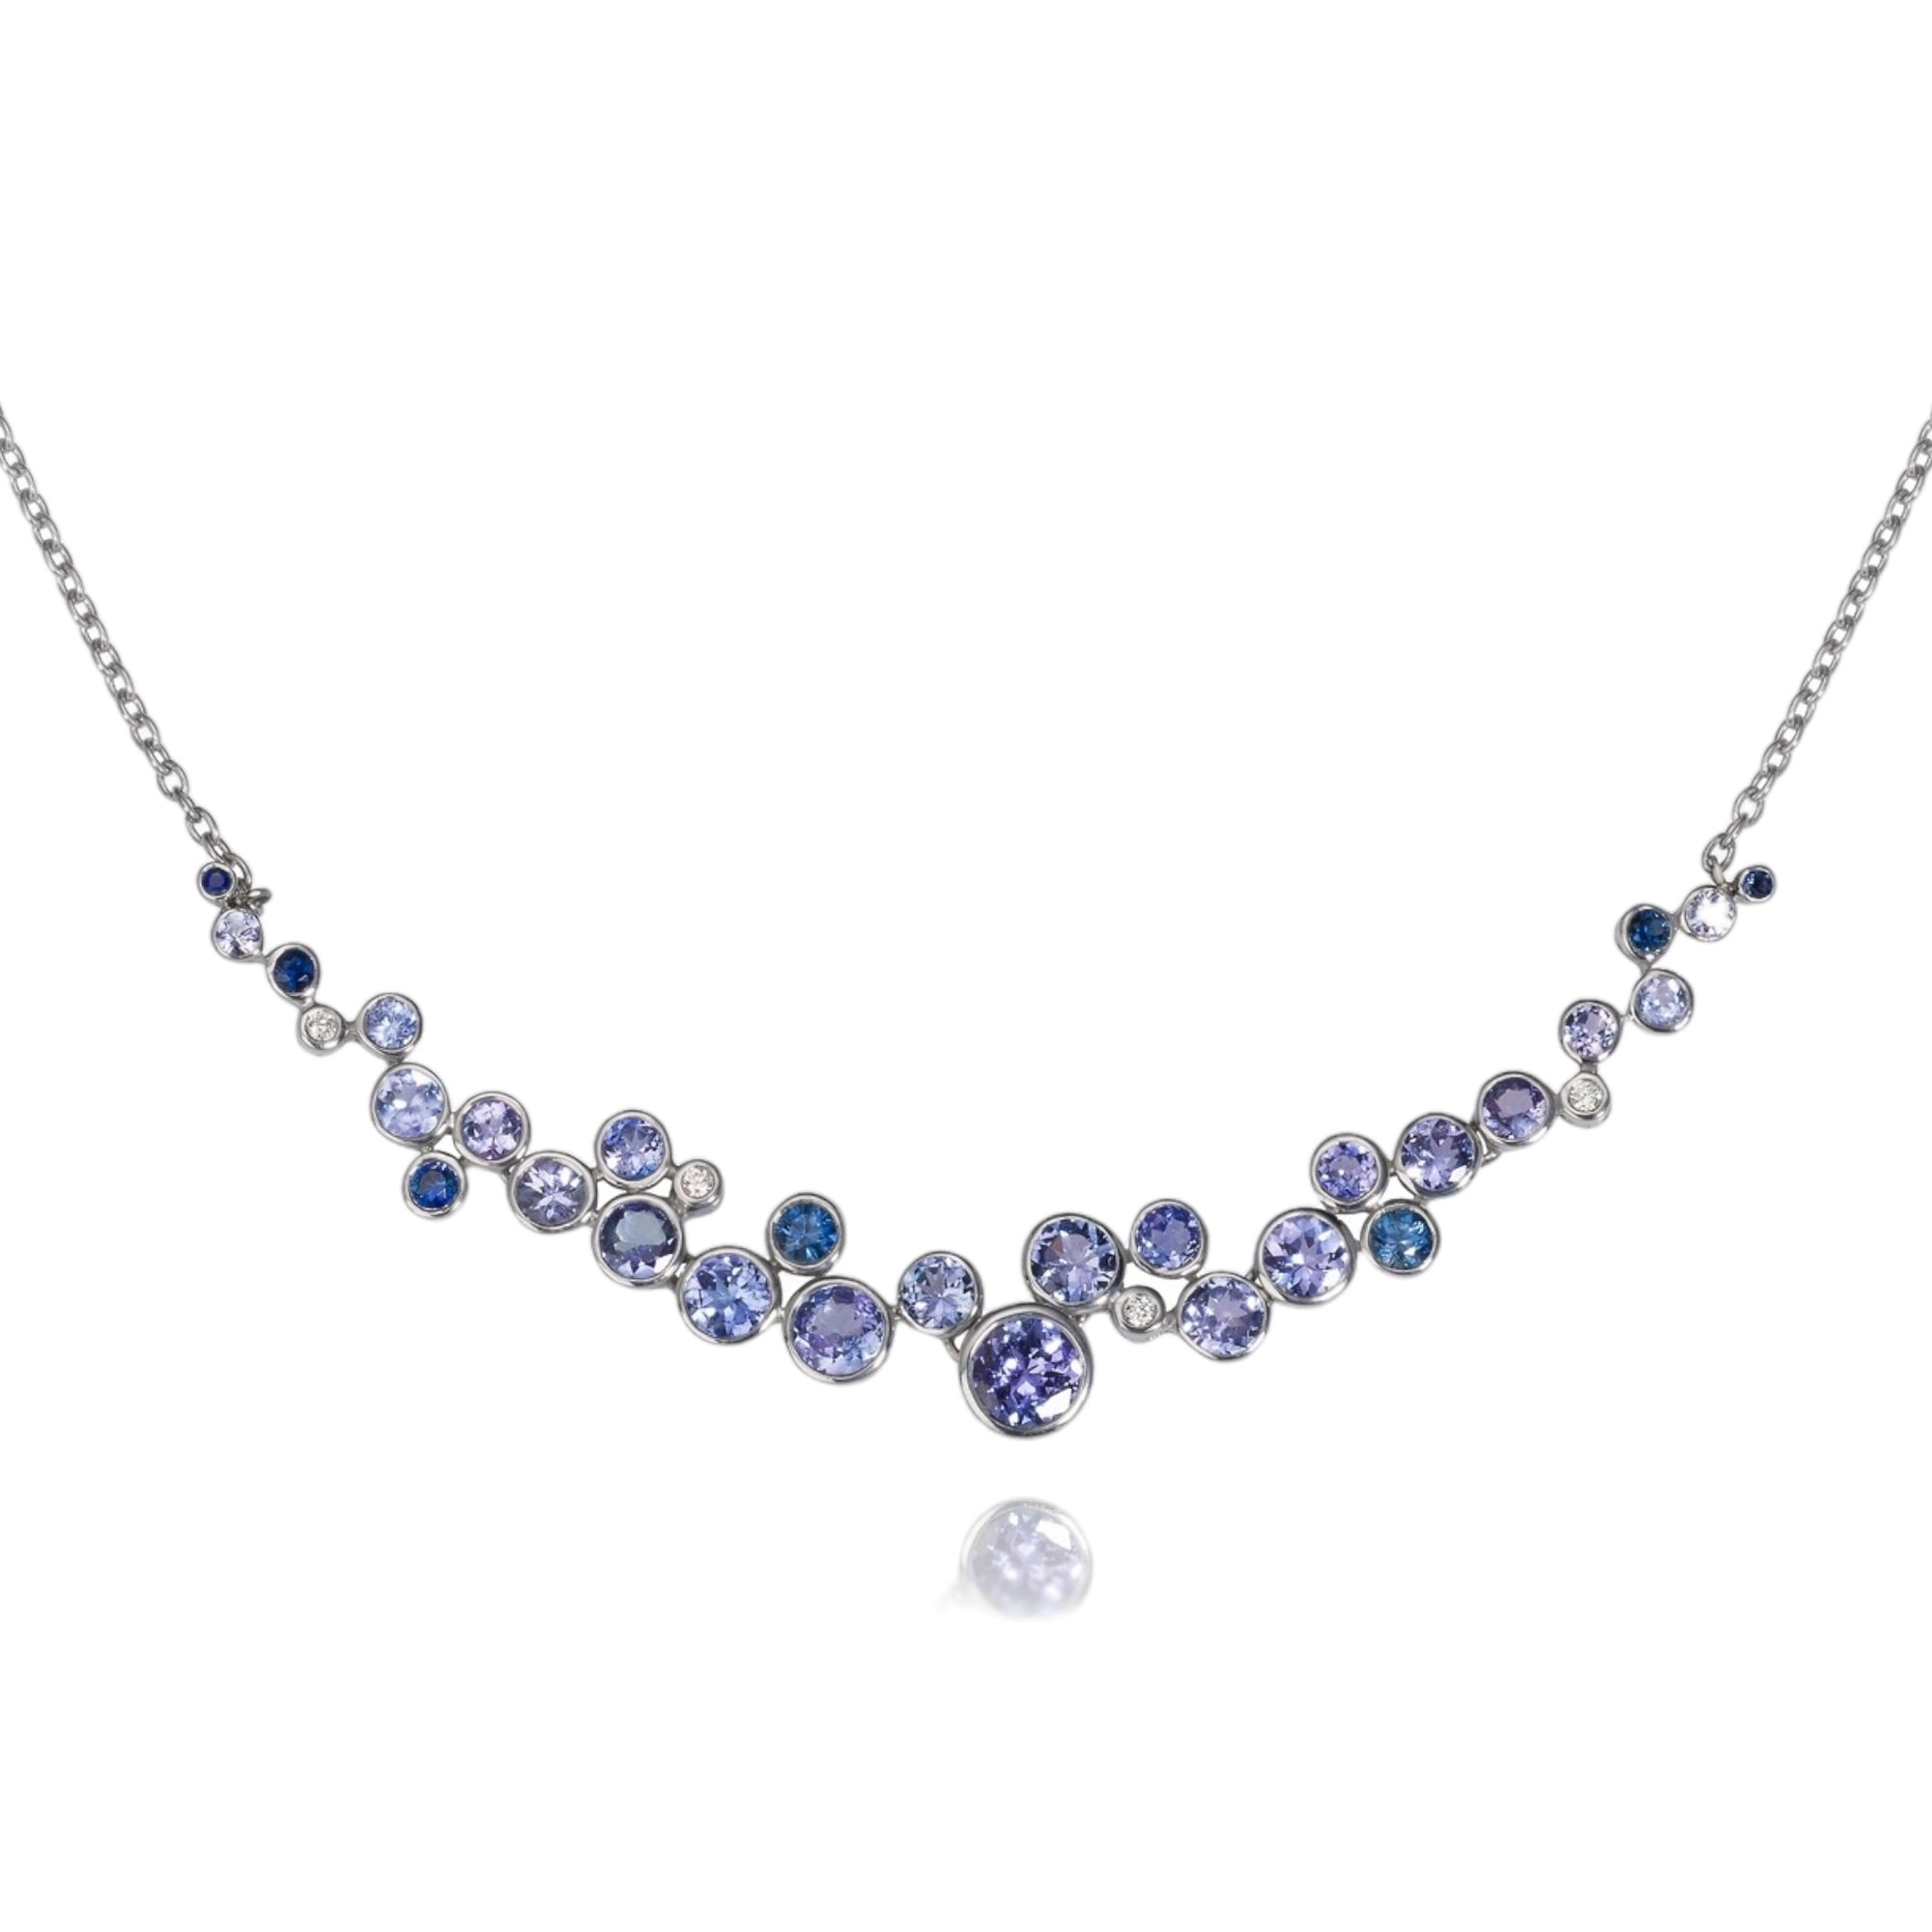 Constellation Blue Ombre Necklace by Martha Seely available at Talisman Collection Fine Jewelers in El Dorado Hills, CA and online. Stats: Your trip to the blue constellation continues with this graceful and elegant blue ombre necklace in 14k gold. With 6.6 cts of sapphires and tanzanites and 0.042 cts of diamonds it will surely dazzle. The cluster is suspended from a delicate 18” cable chain with a lobster clasp.